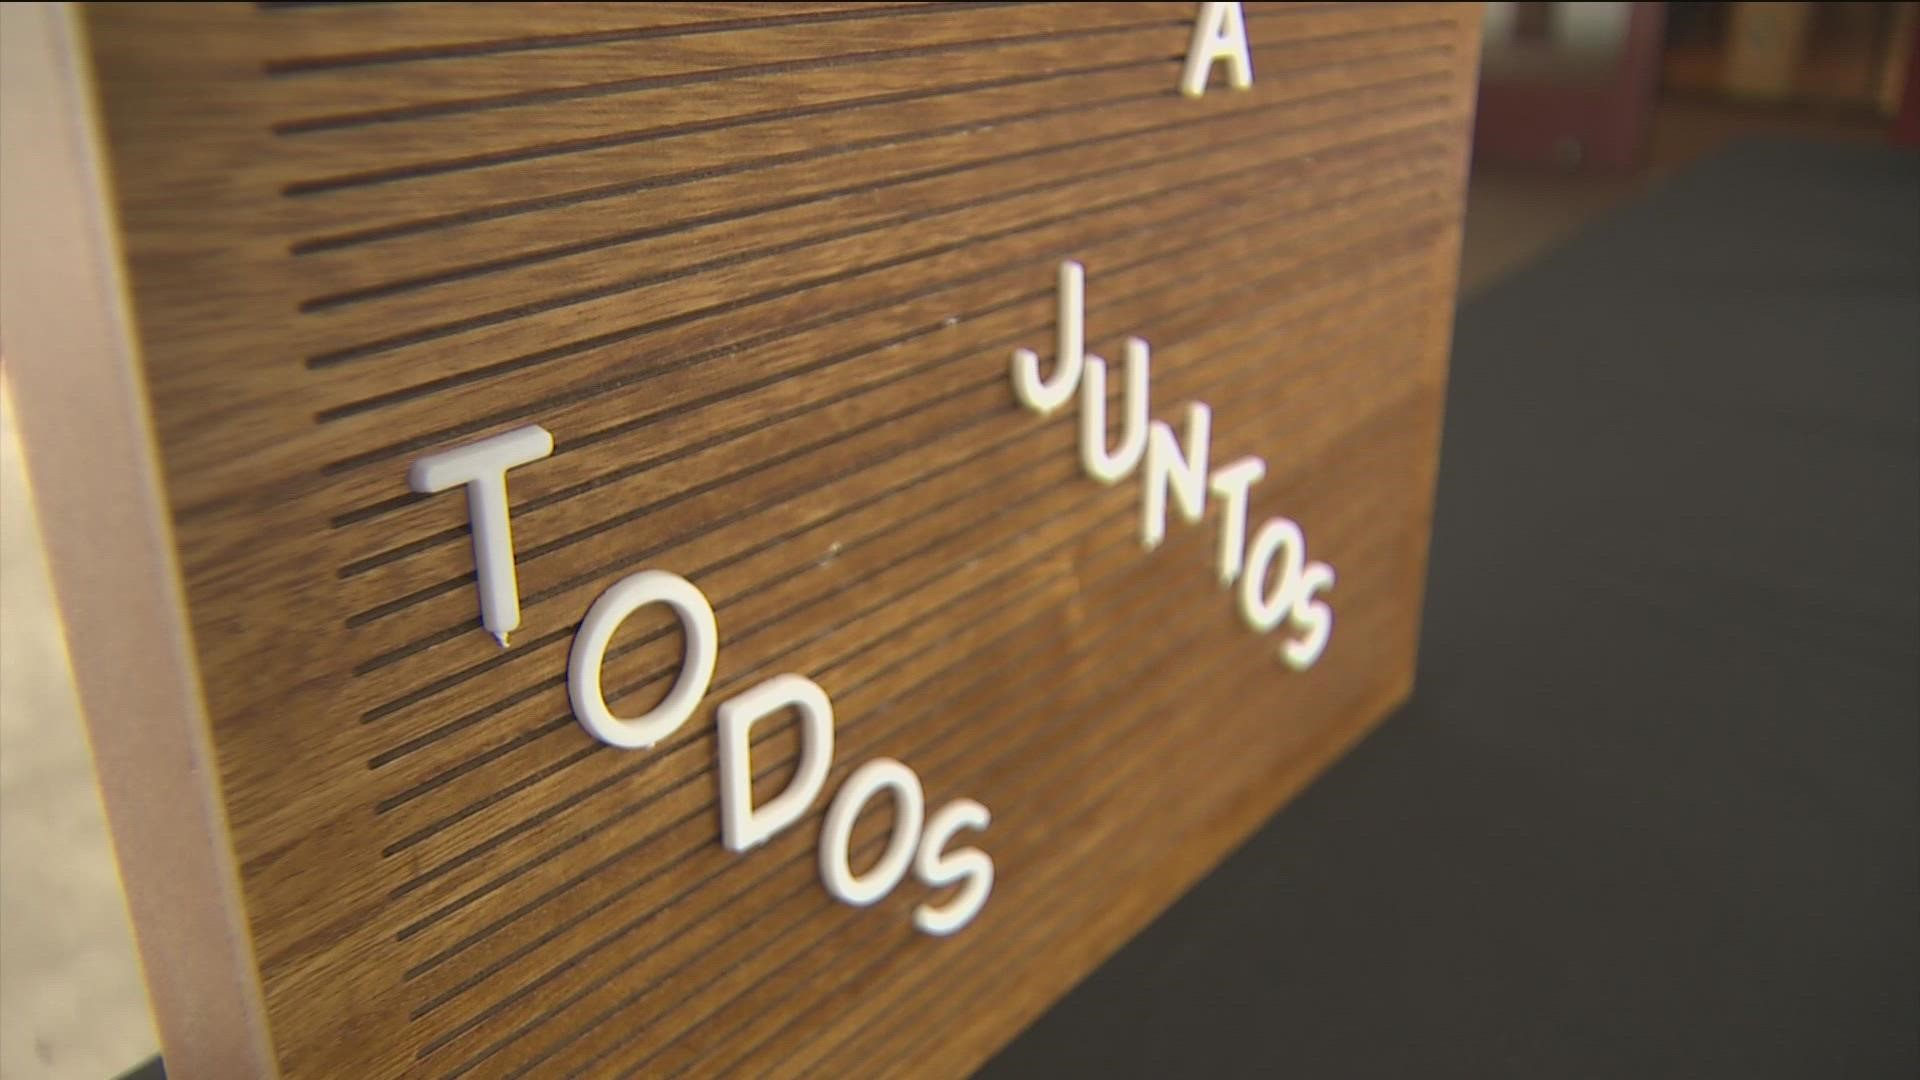 Todos Juntos Learning Center is allowing immigrants to Austin become part of the community. KVUE's Yvonna Nava has more.